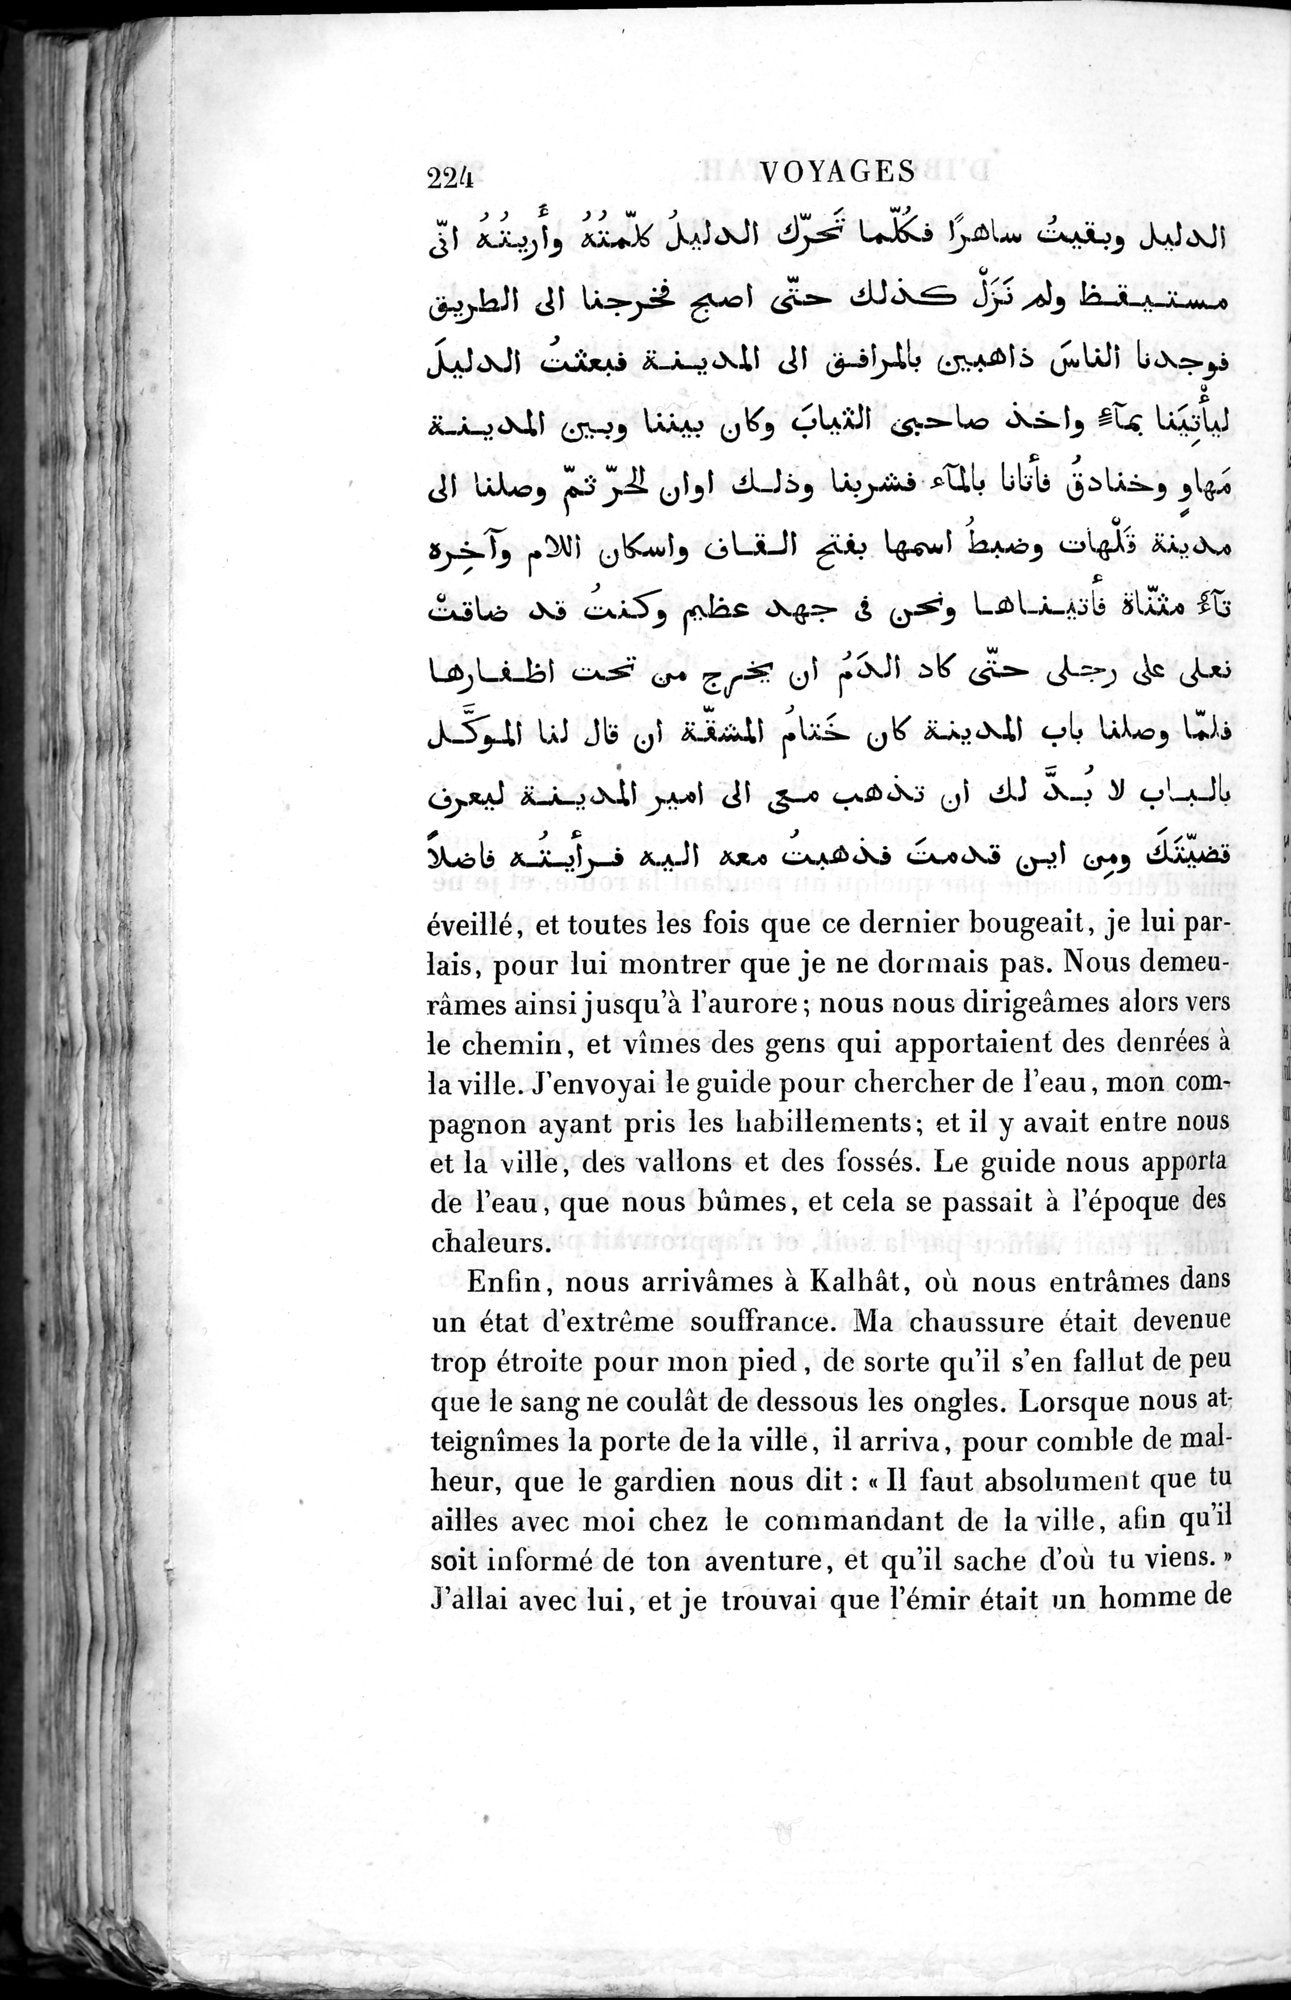 Voyages d'Ibn Batoutah : vol.2 / Page 252 (Grayscale High Resolution Image)